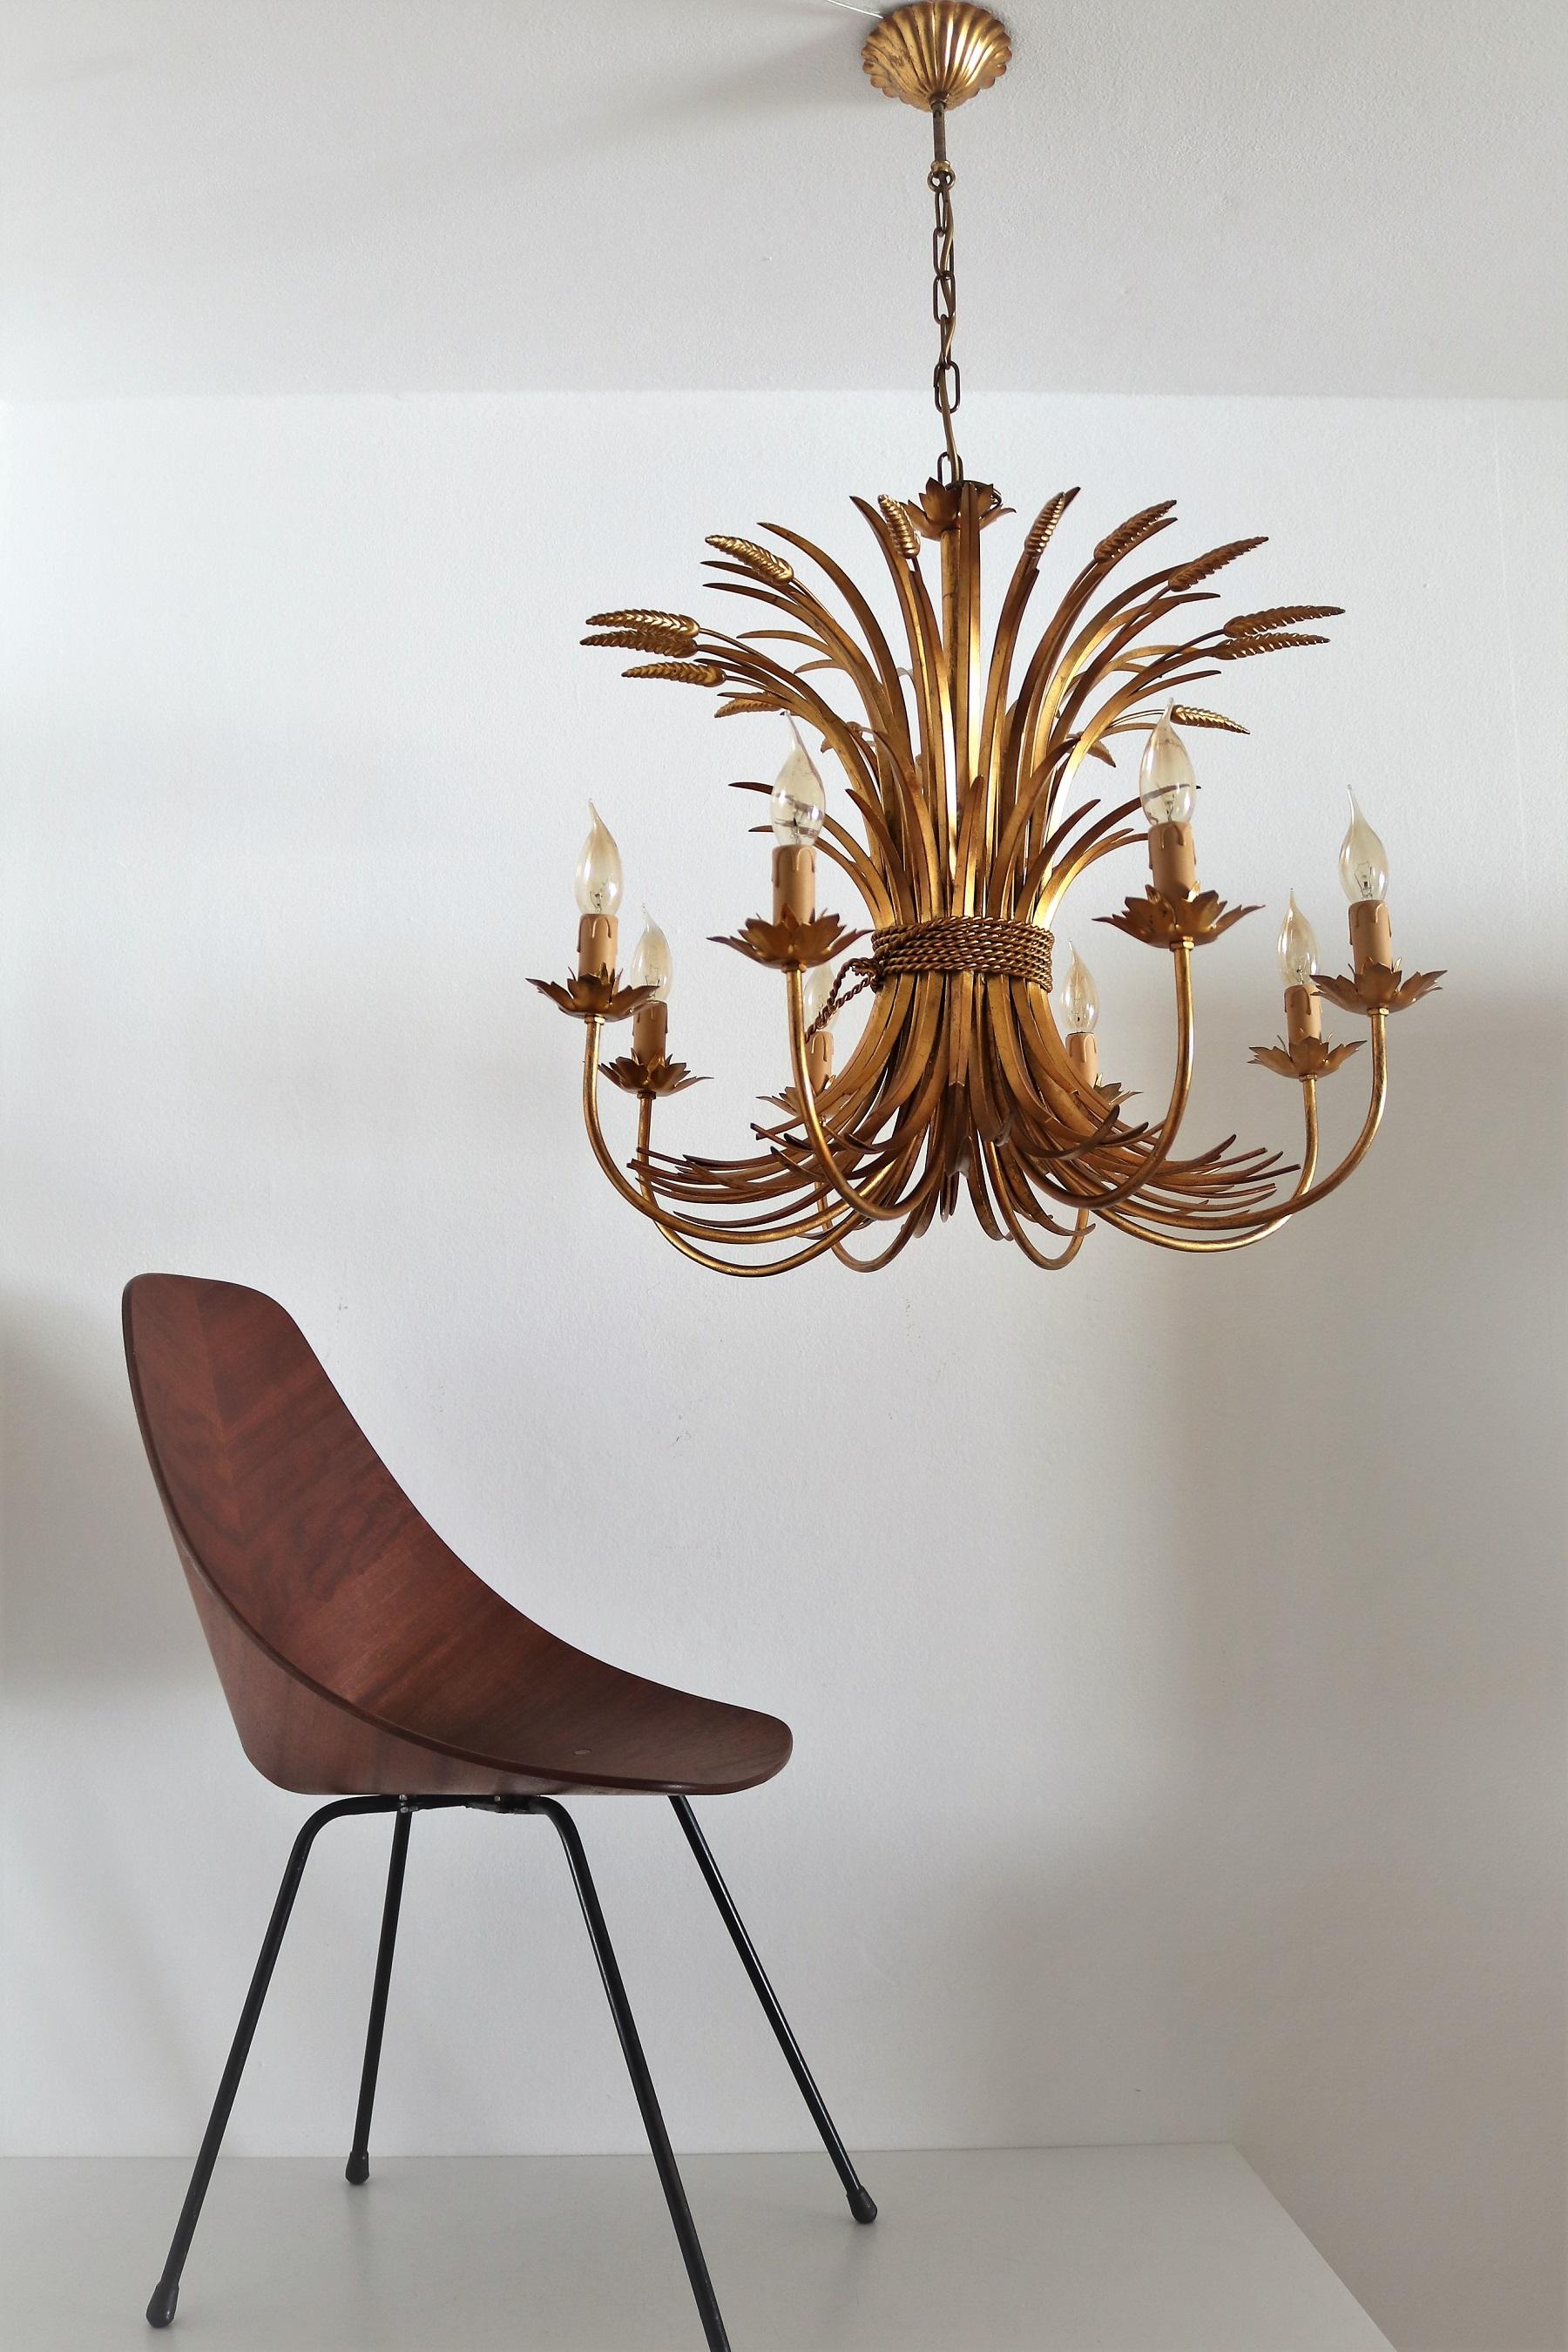 Mid-Century Modern Italian Midcentury 8-Arm Gilt Chandelier with Wheat and Leaves, 1960s